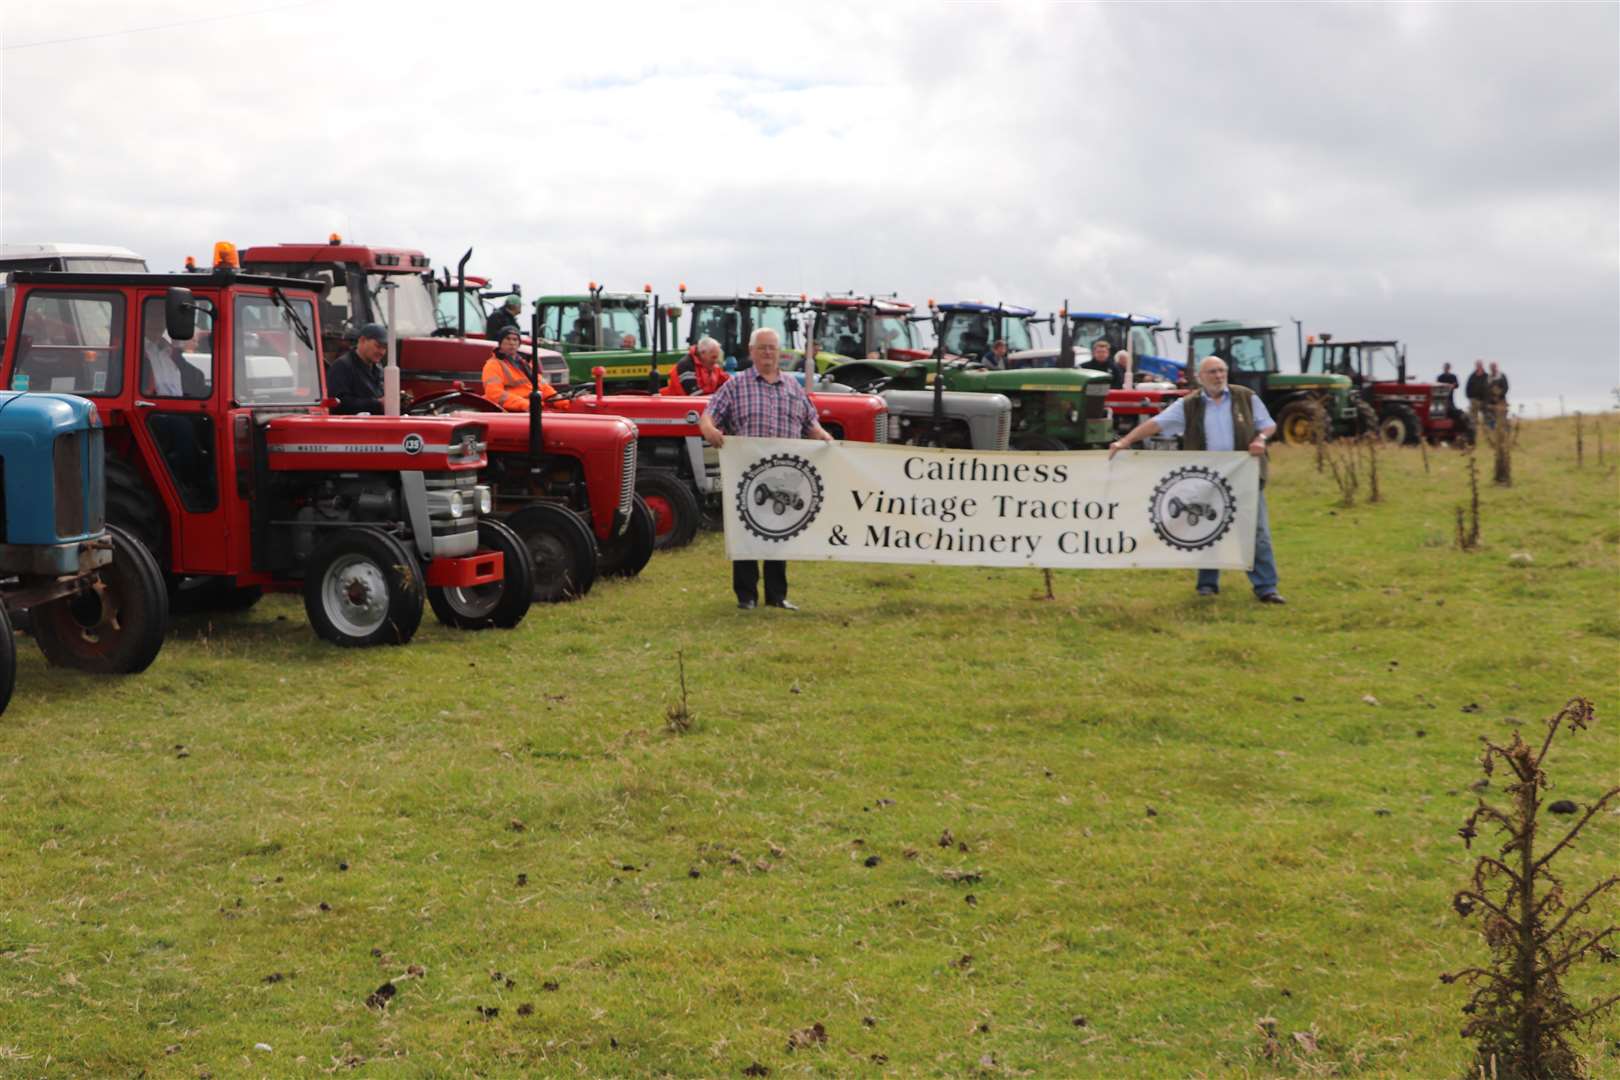 Displaying the Caithness Vintage Tractor and Machinery Club banner during the Ernest McAdie memorial tractor road run. Picture: Brian Polson